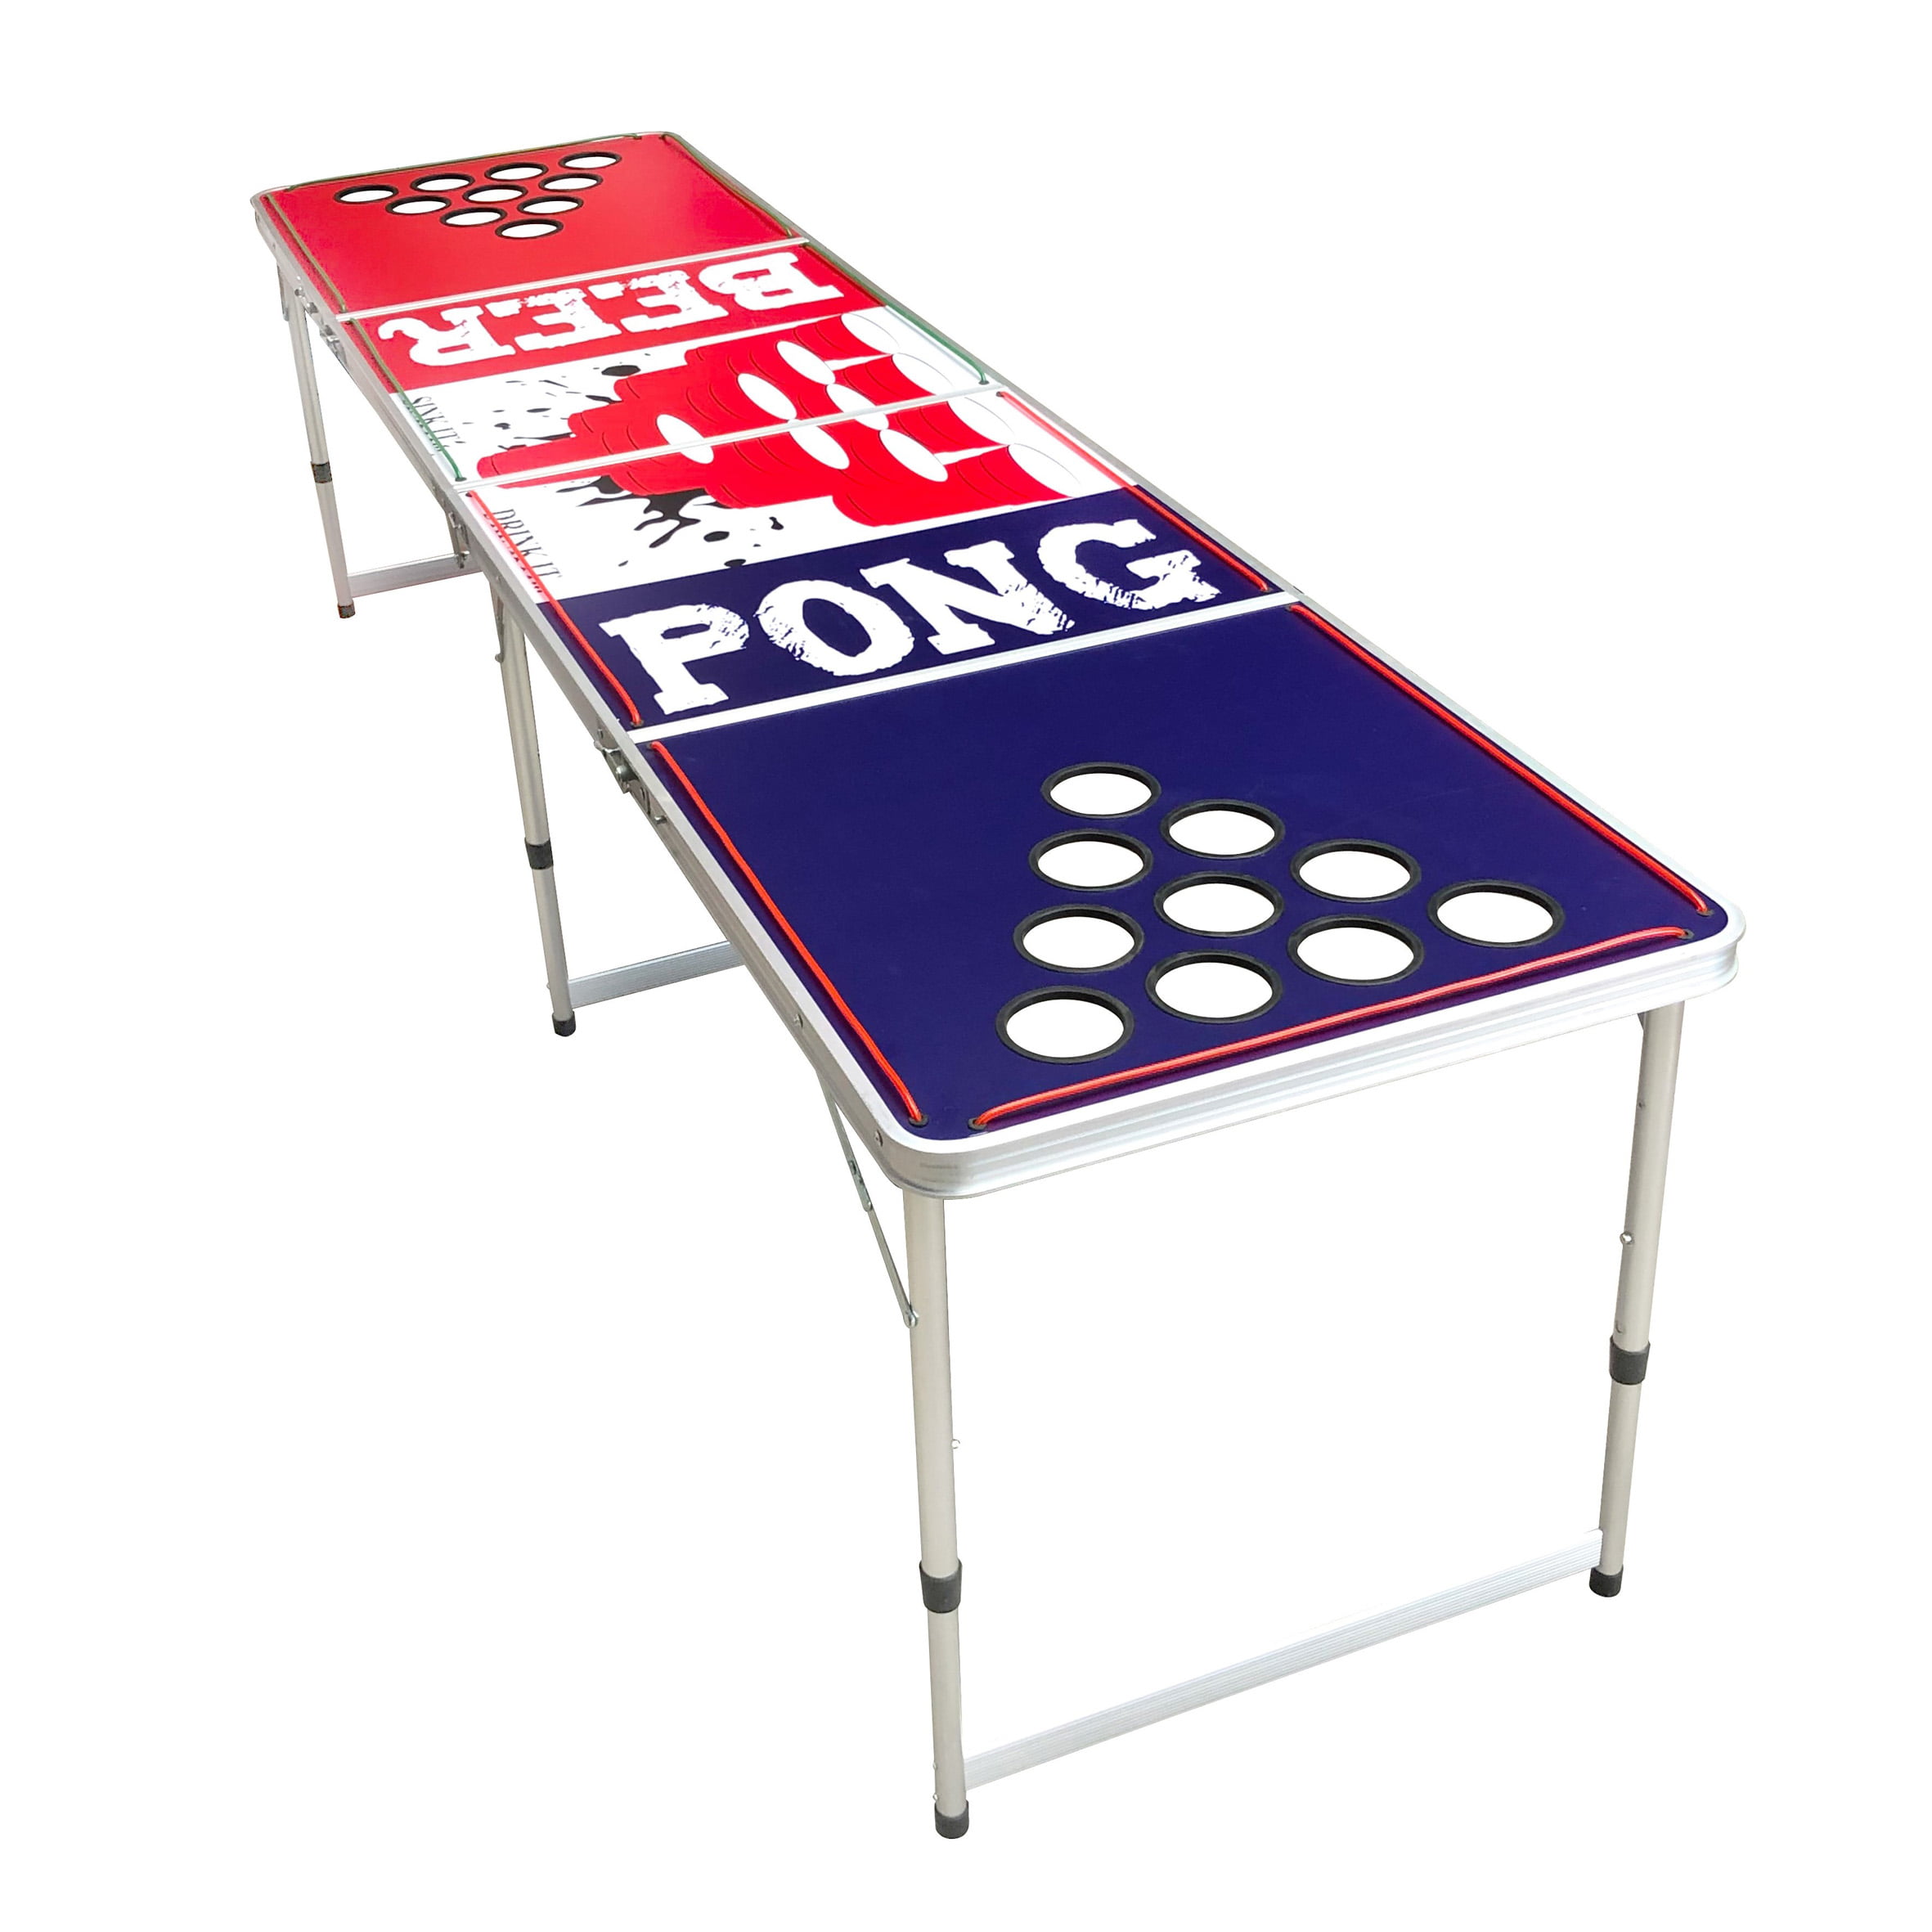 Details about   Beer Pong Table Game Table 8' Folding Drinking Game Party w/ Led Lights Blue Red